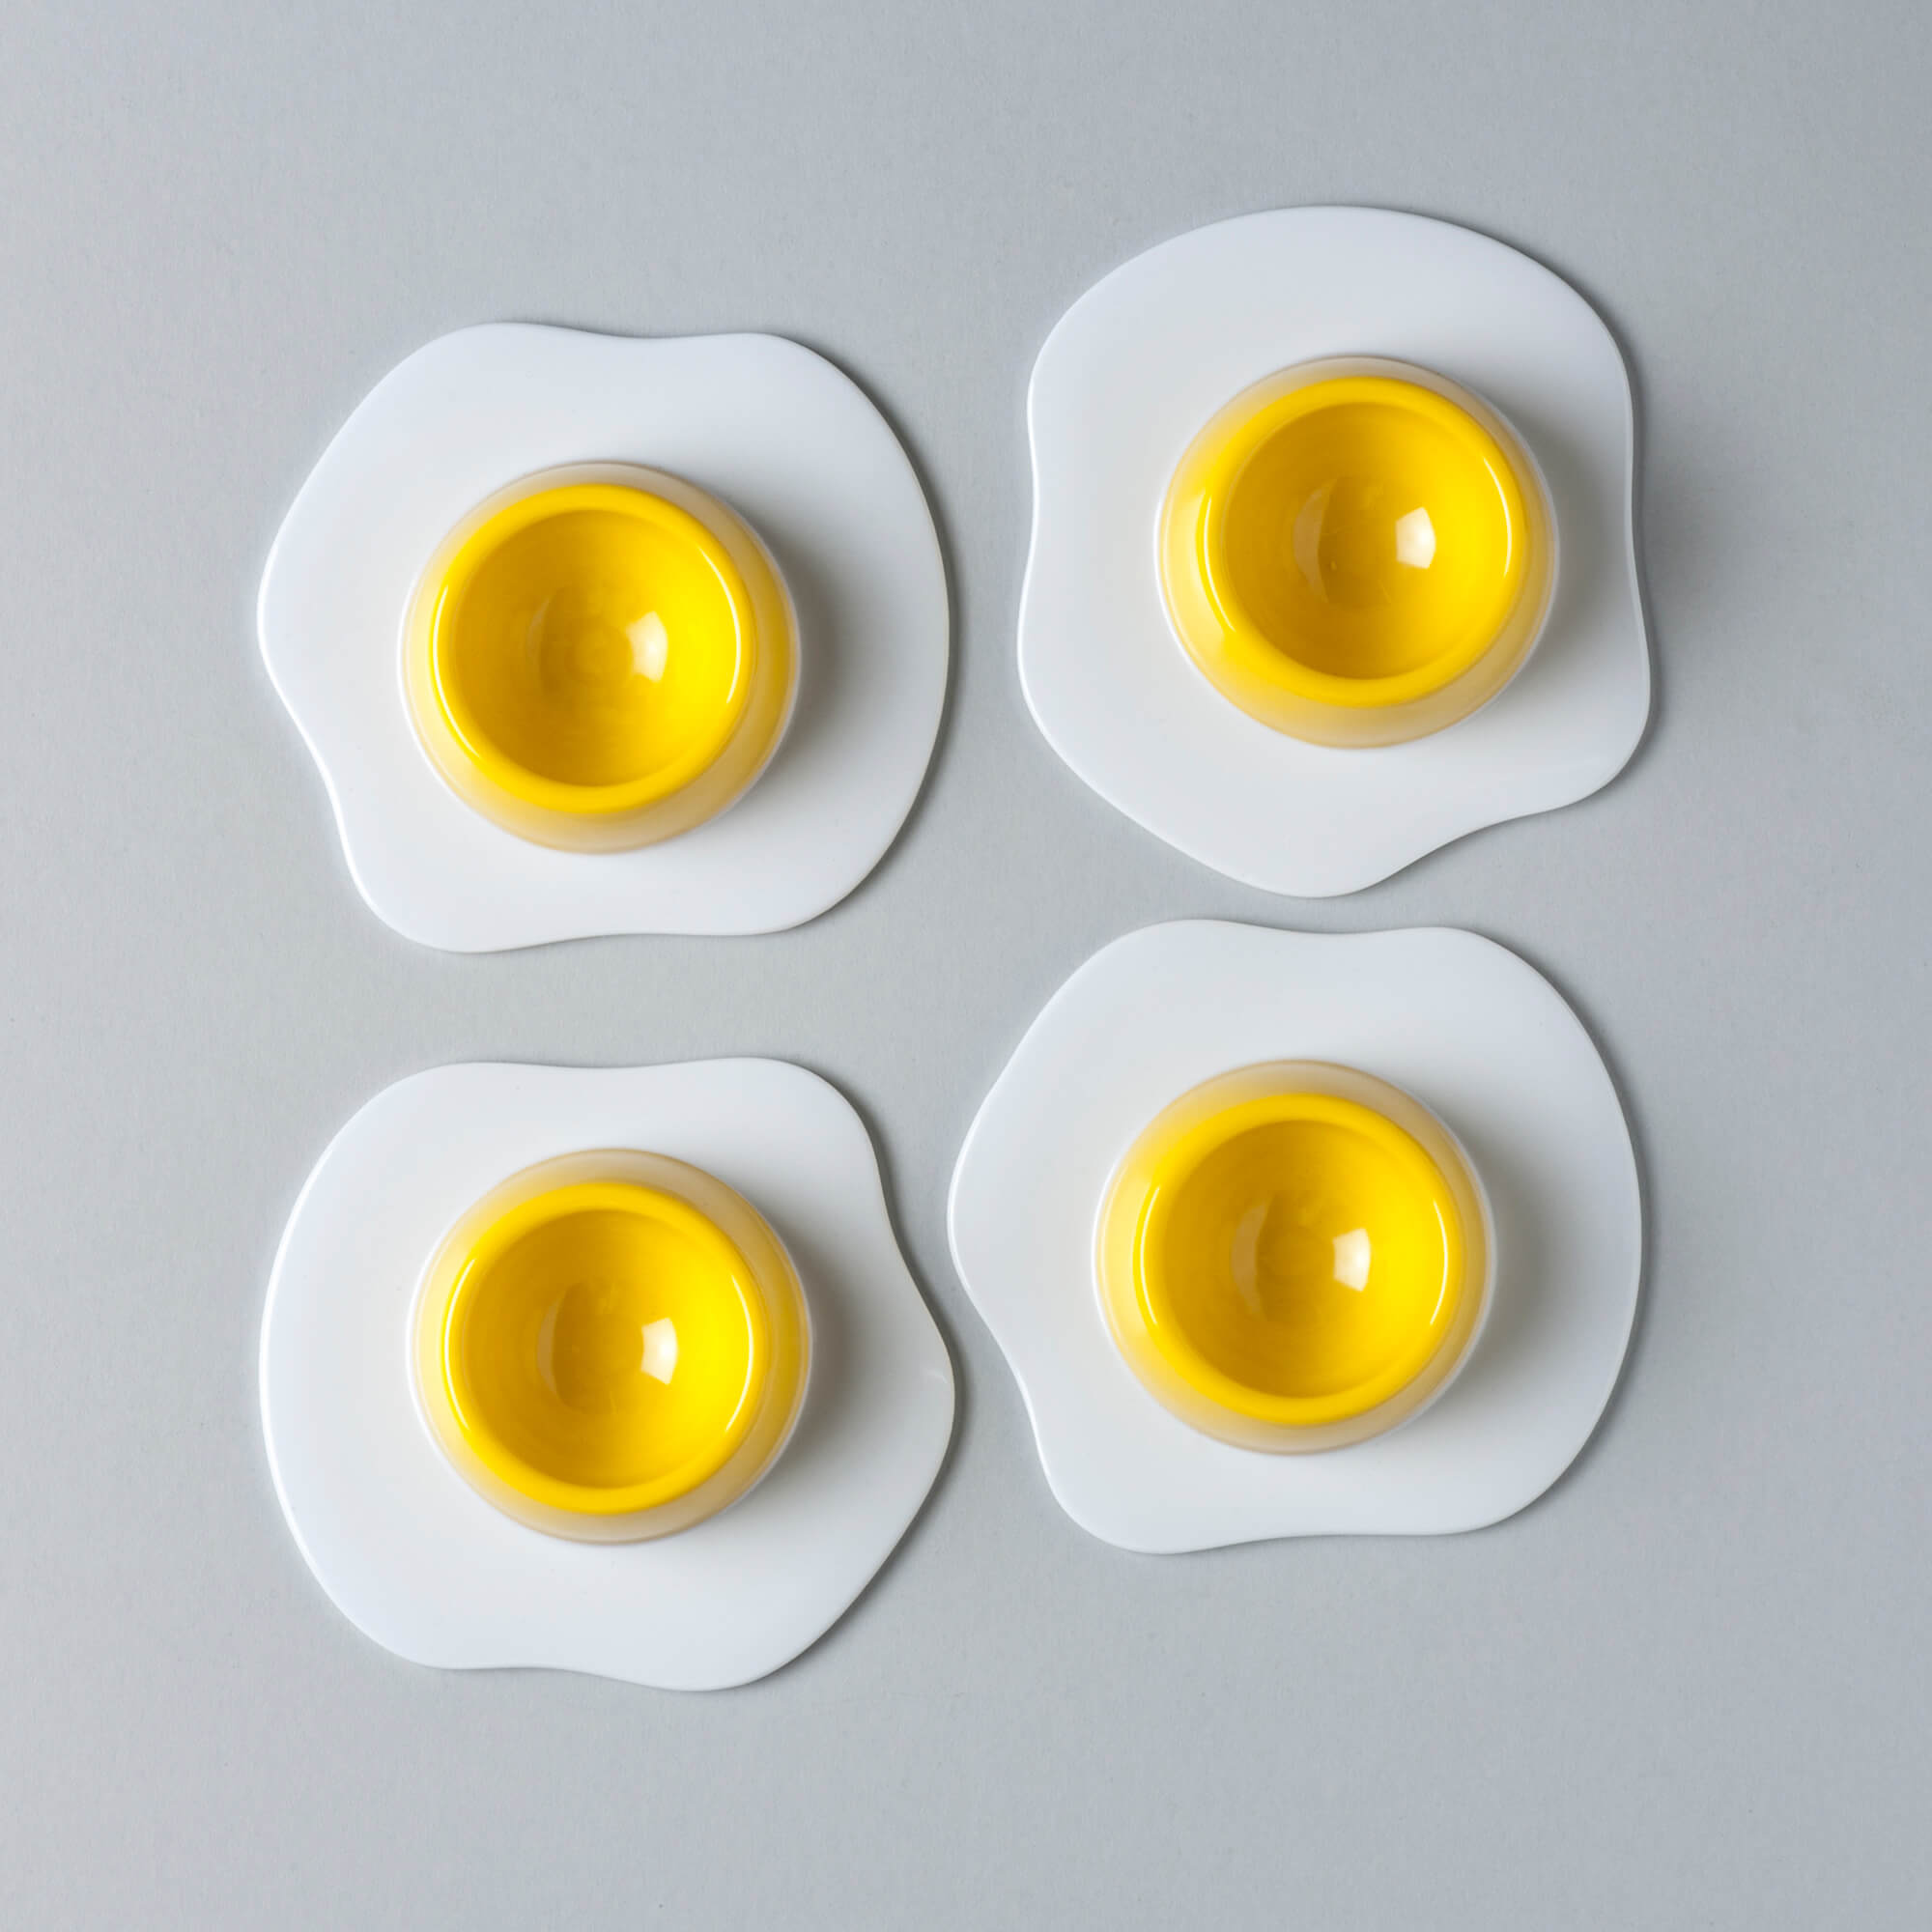 Top down of Set of 4 novelty Eggtastic Egg Cups